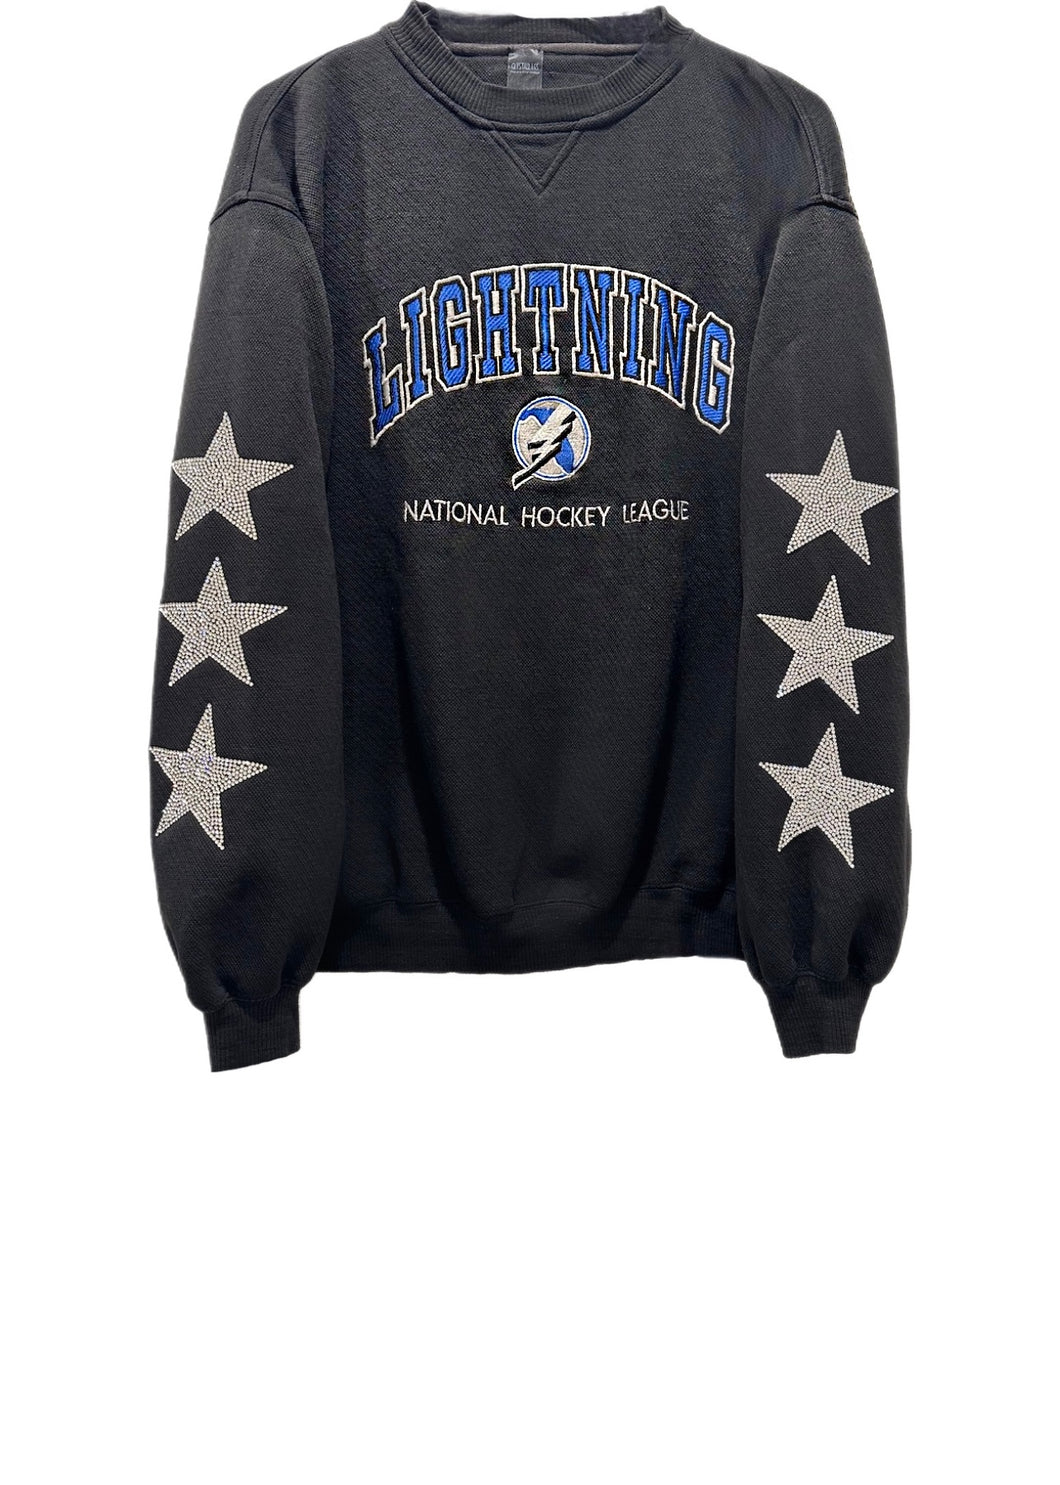 Tampa Bay Lightning, NHL One of a KIND Vintage “Rare Find” Sweatshirt with Three Crystal Star Design